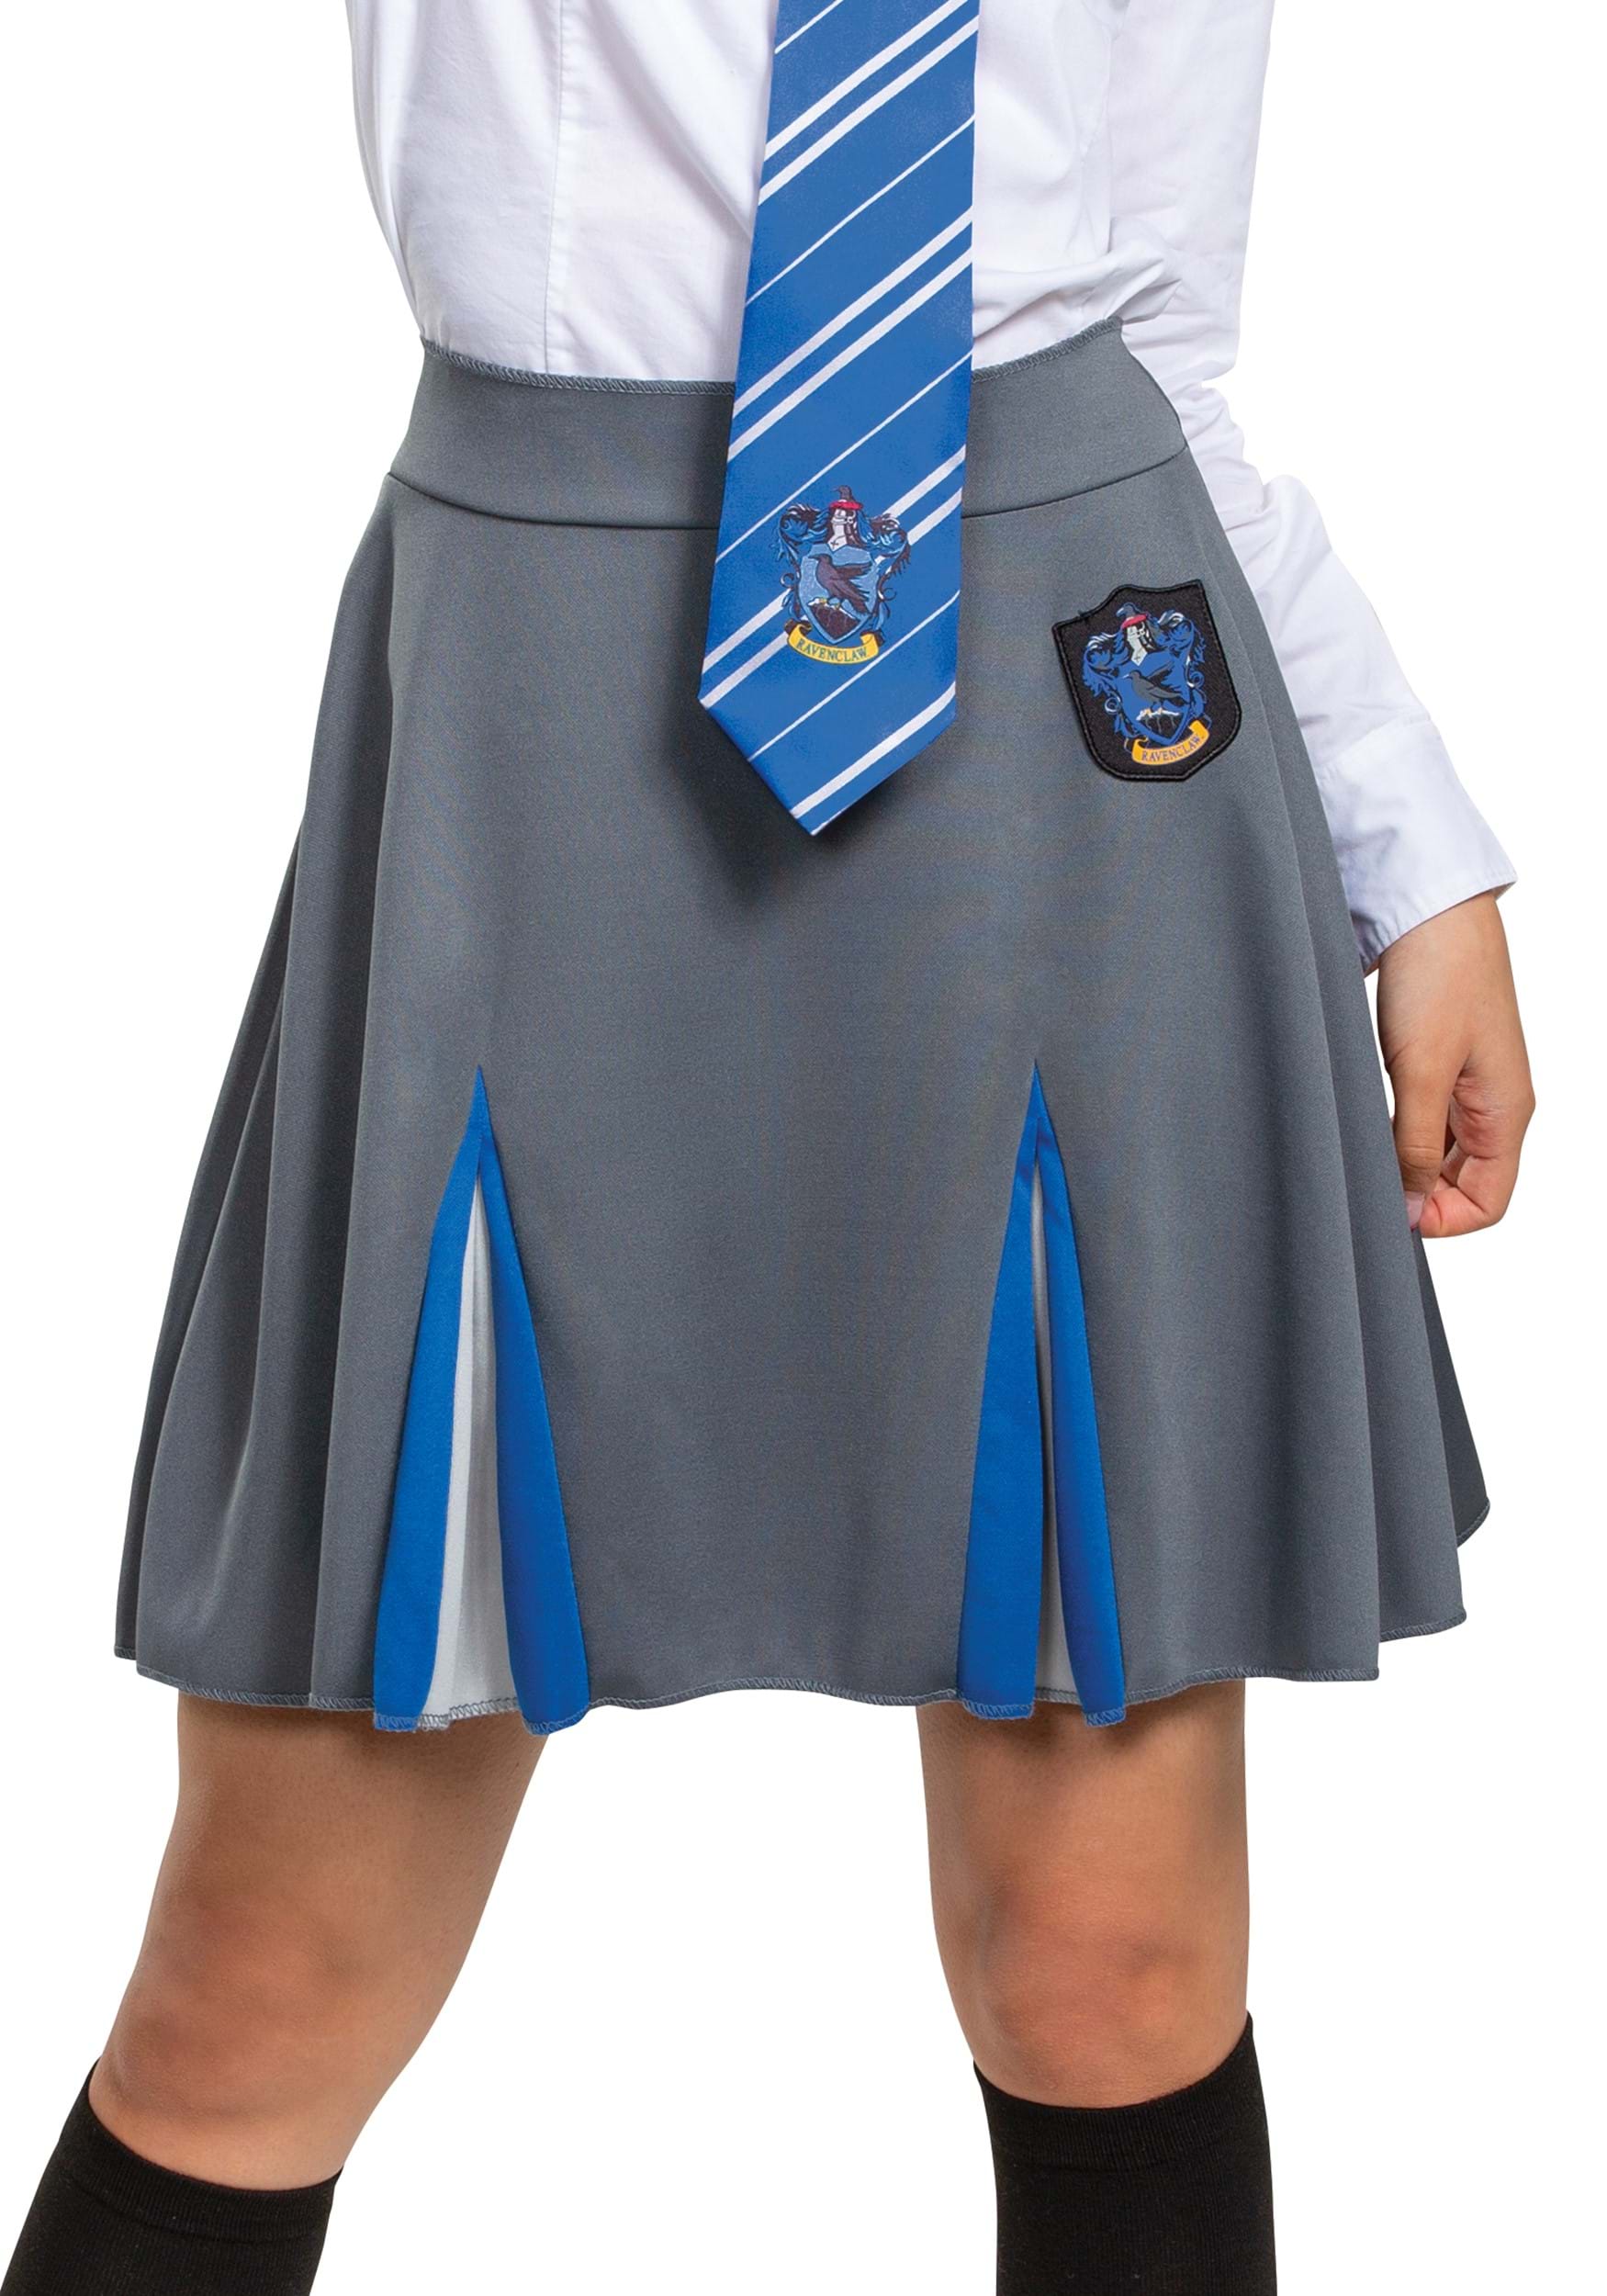 Ravenclaw Printed Top Child Costume 